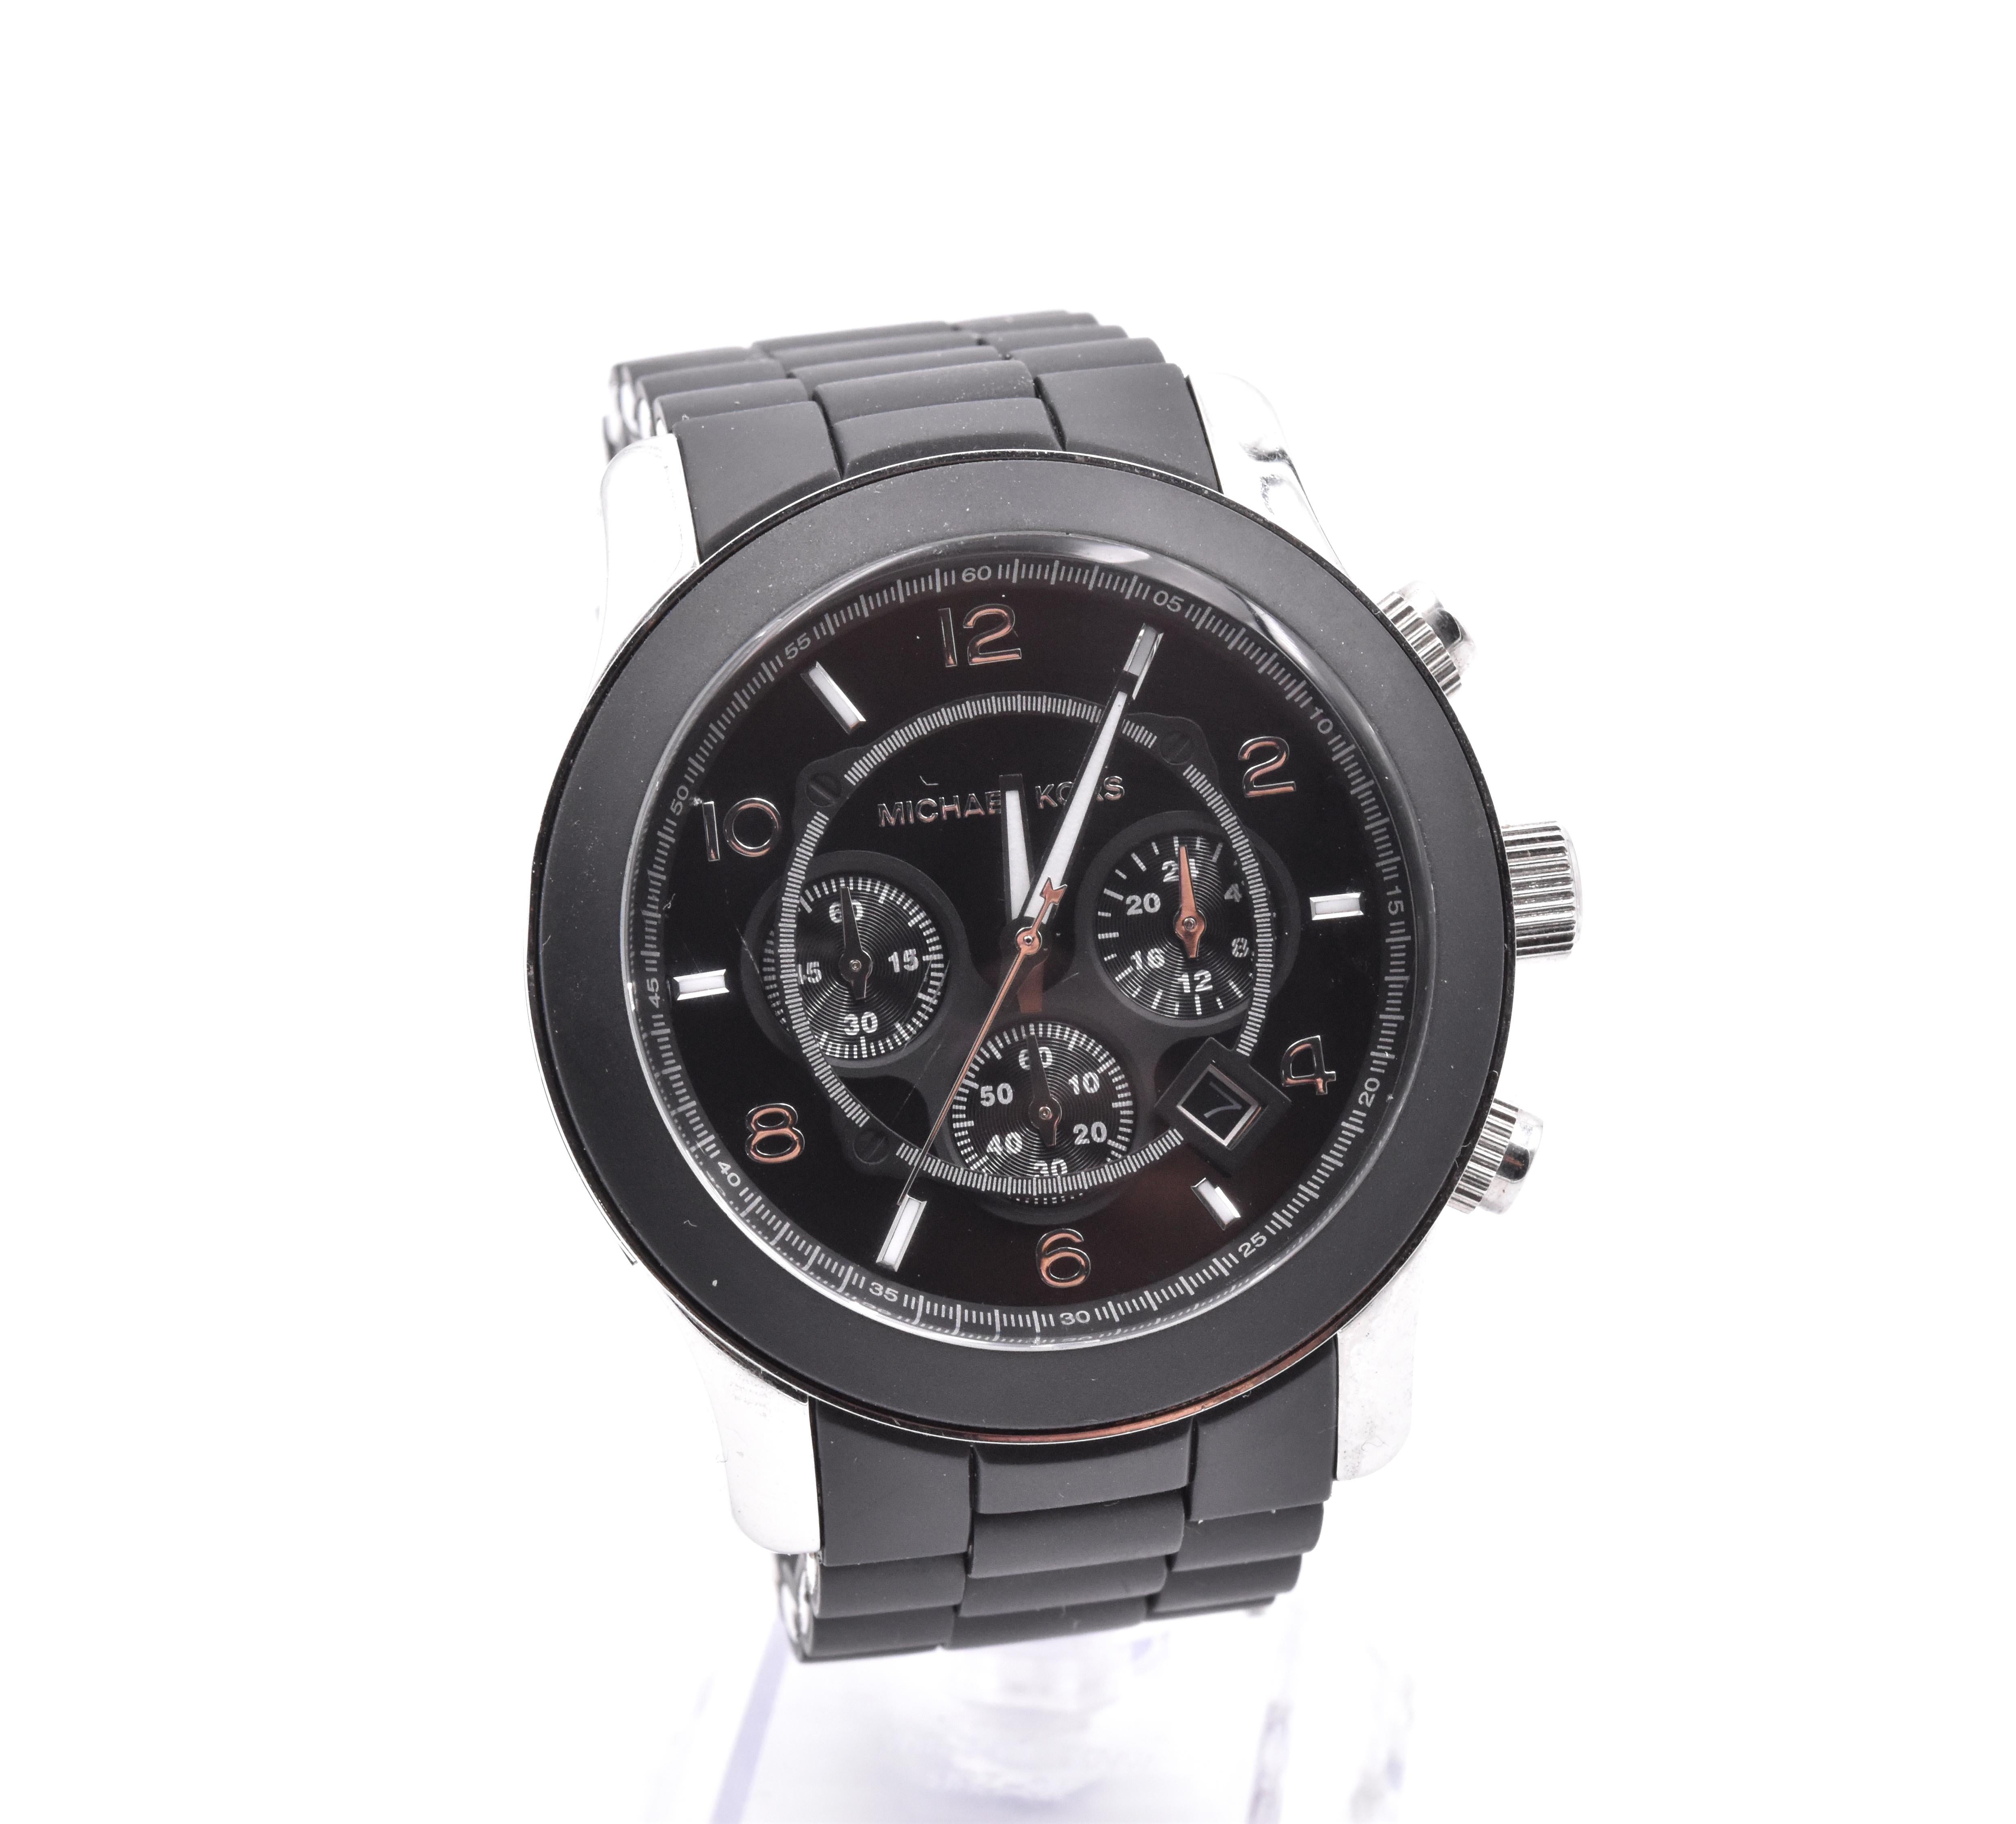 Movement: quartz
Function: Date, hours, minutes, seconds, chronograph
Case: 44mm round case, sapphire crystal, pull crown, crystal bezel 
Band: black rubber, stainless steel deployment clastp
Dial: Black alternating stick and Arabic numeral dial 